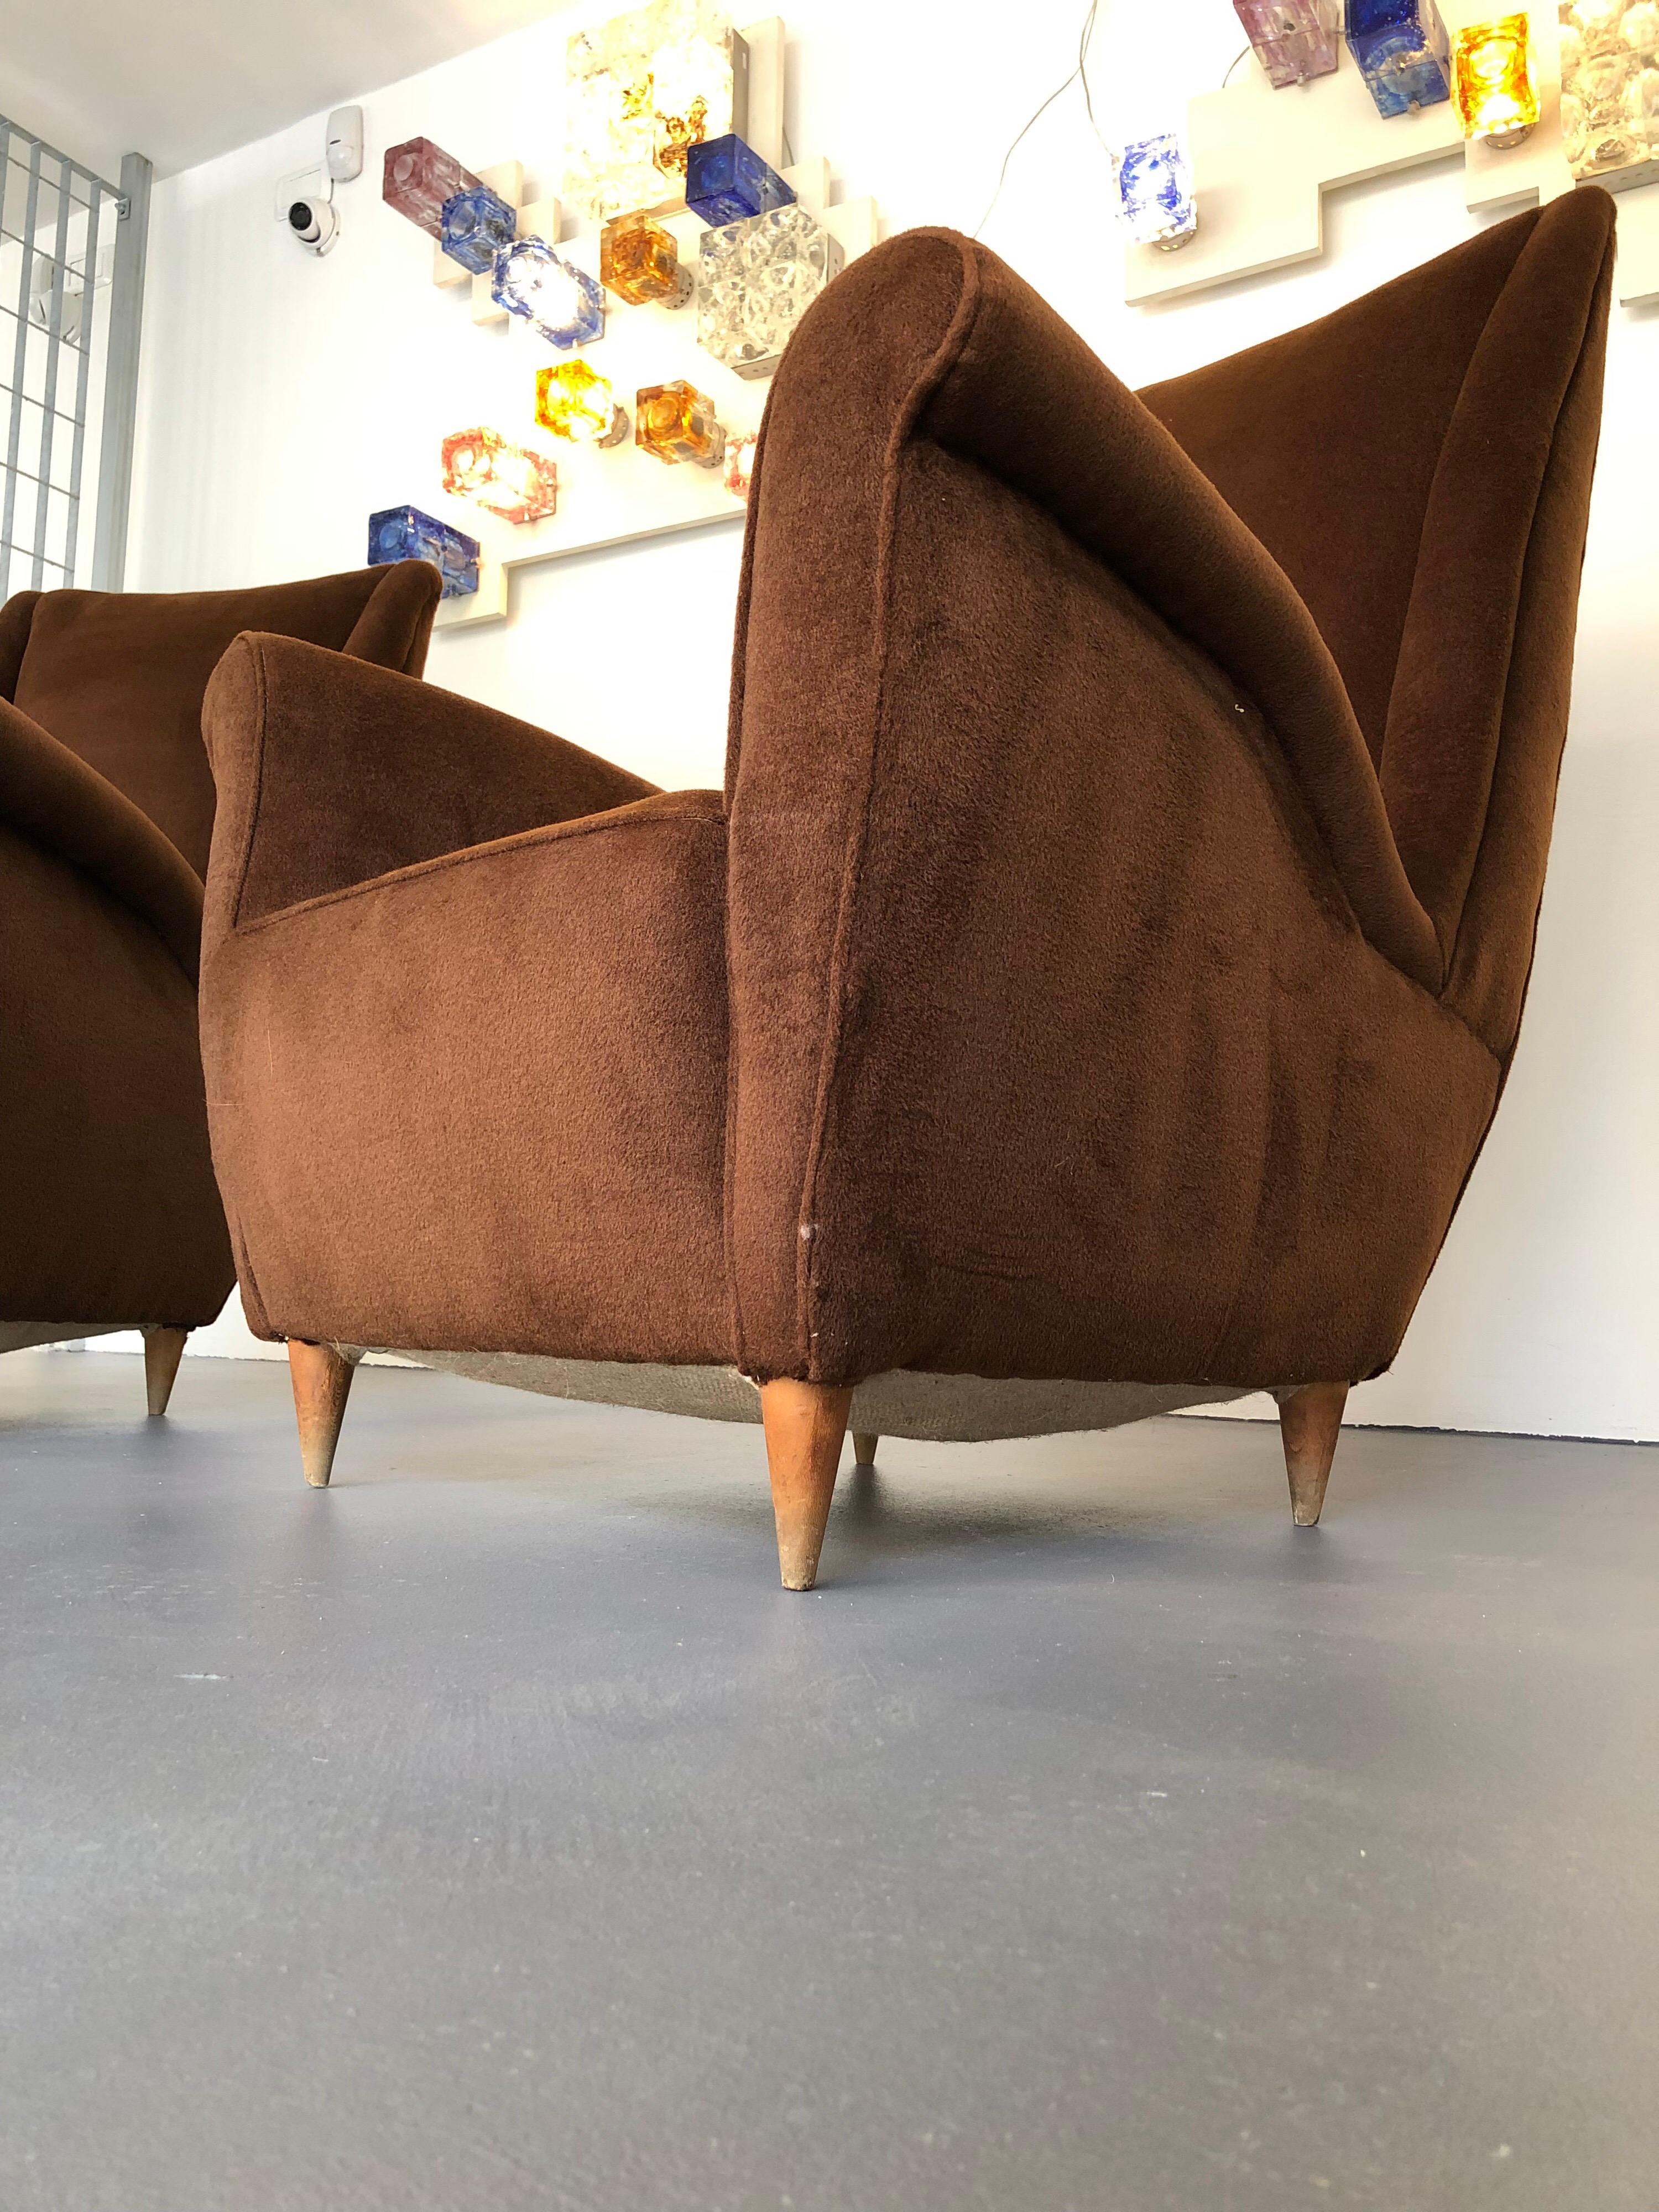 Great pair of rare armchairs designed by Gio Ponti in the 1950s. They have been restored and reupholstered with original vintage wool velvet. Measures: Height 98 cm, width 78 cm, depth 77 cm.